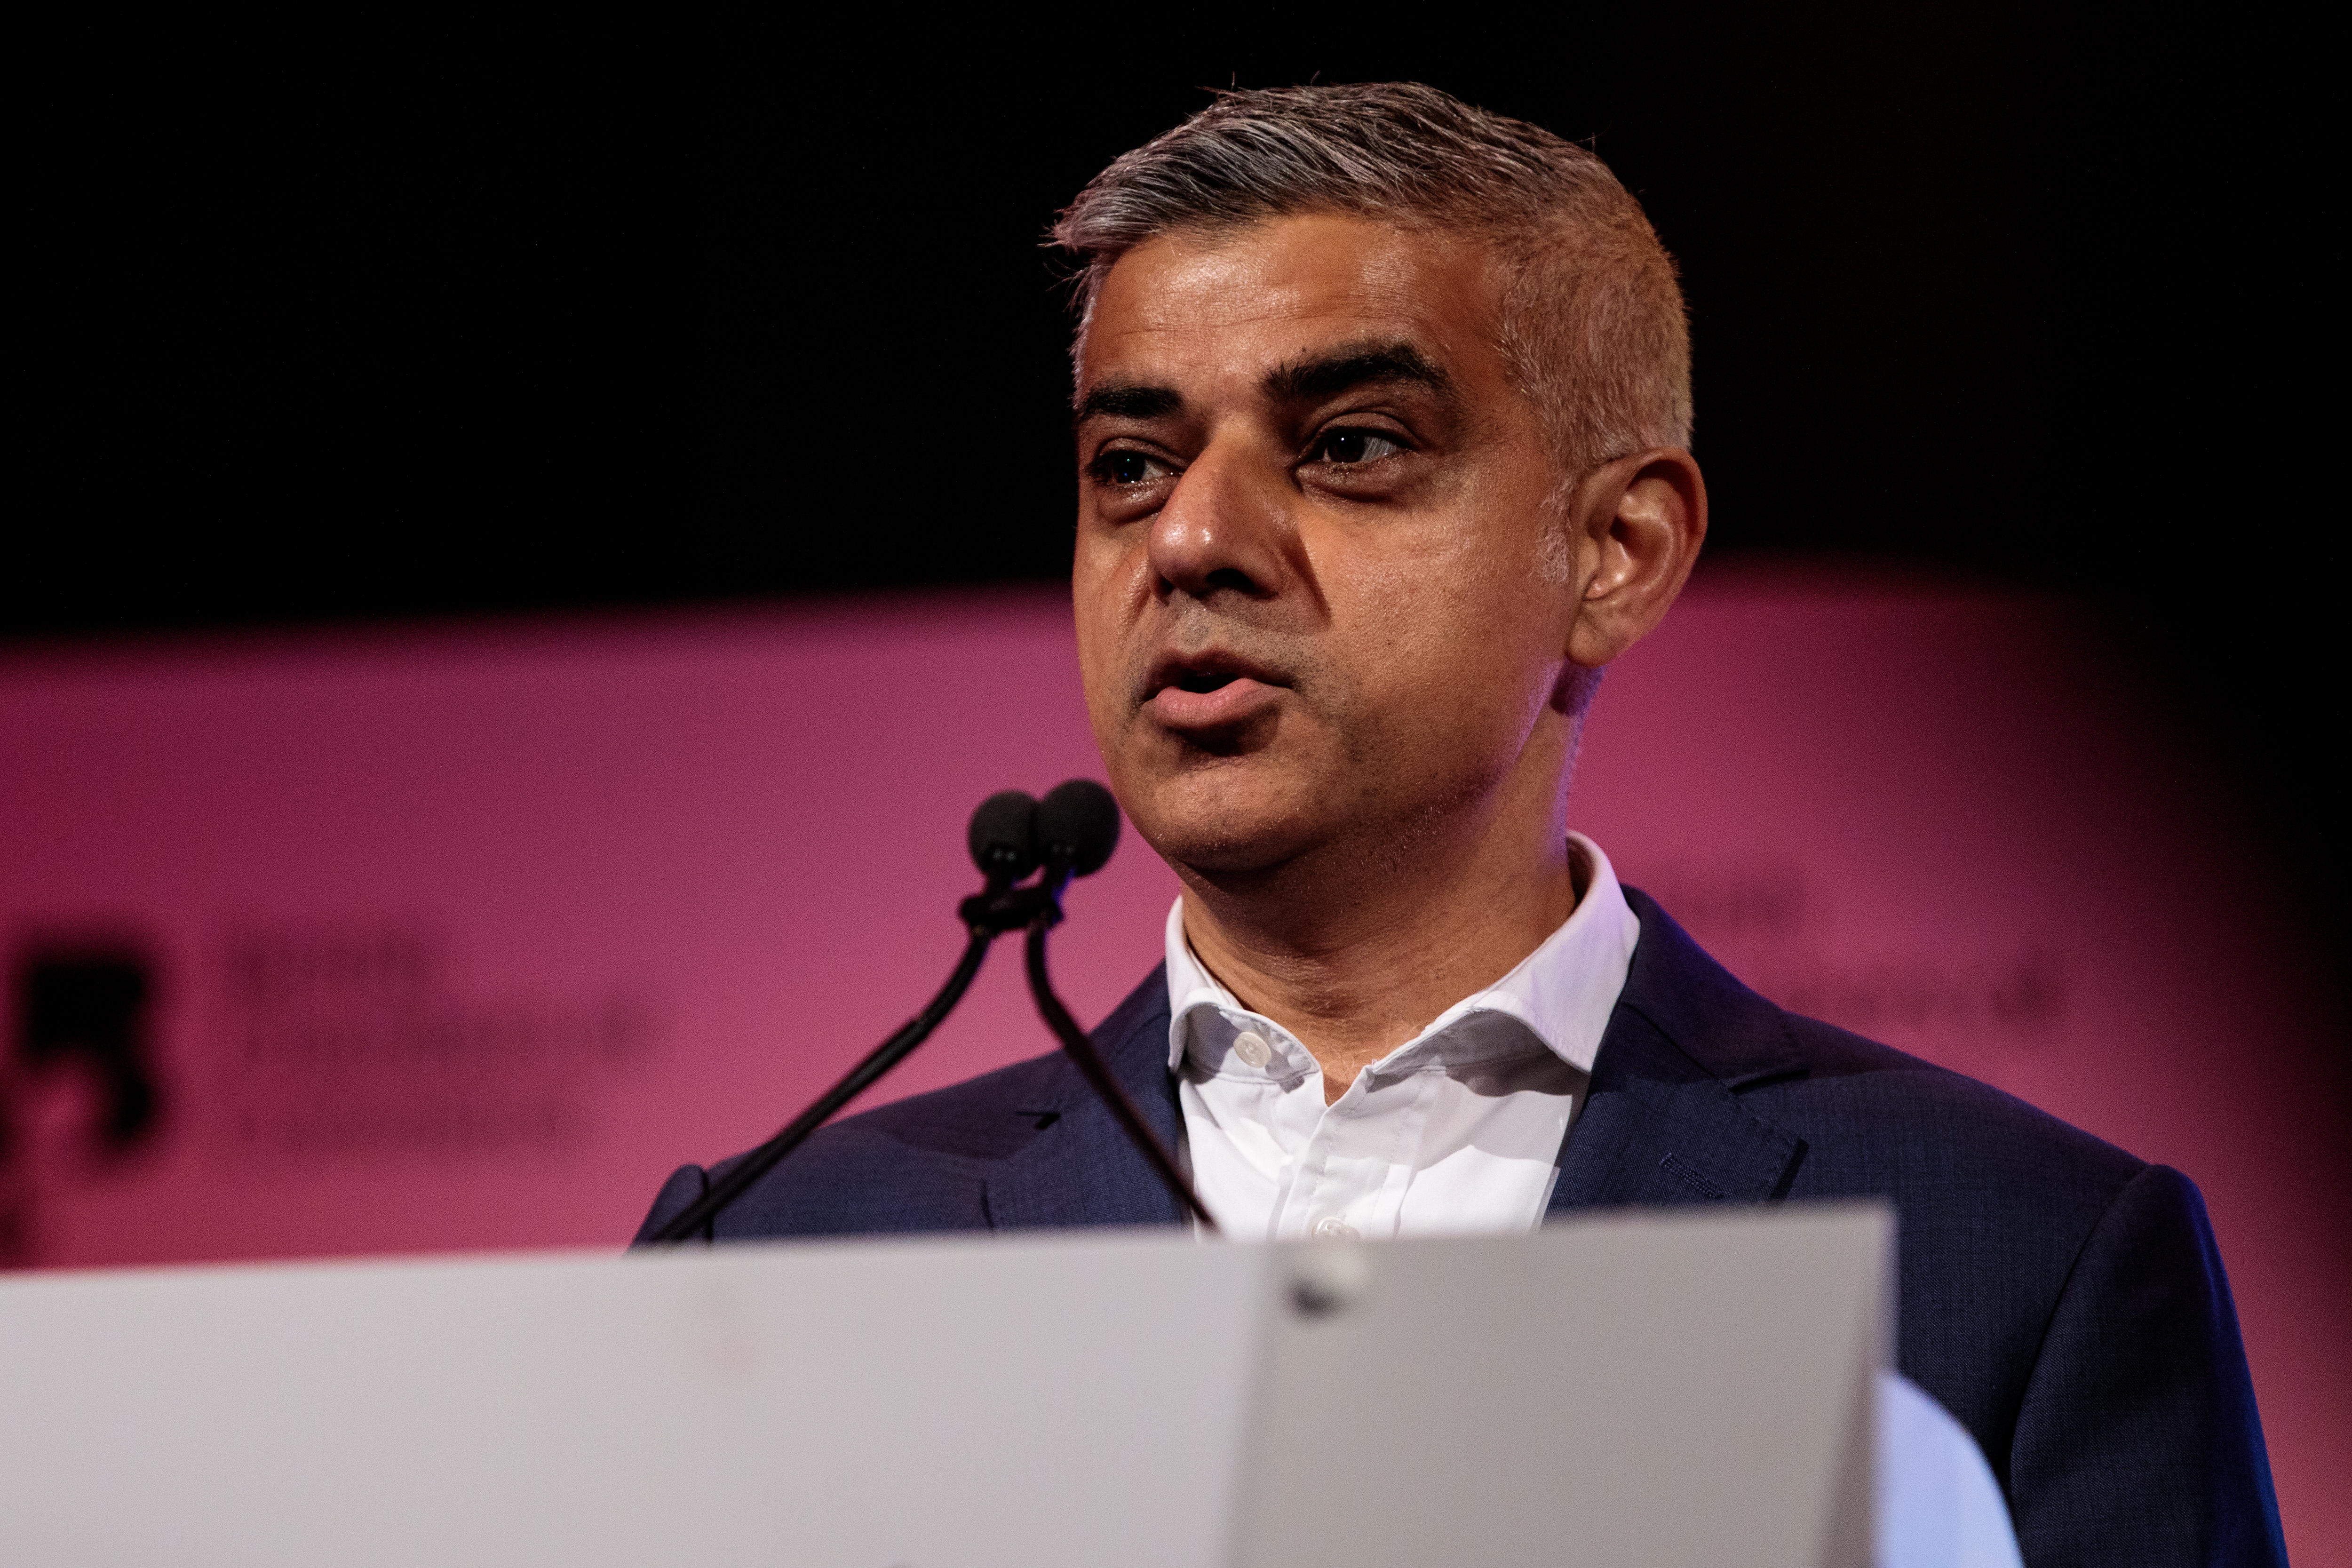 LONDON, ENGLAND - MARCH 28: Mayor of London Sadiq Khan speaks at the annual British Chambers of Commerce conference on March 28, 2019 in London, England. (Jack Taylor/Getty Images)